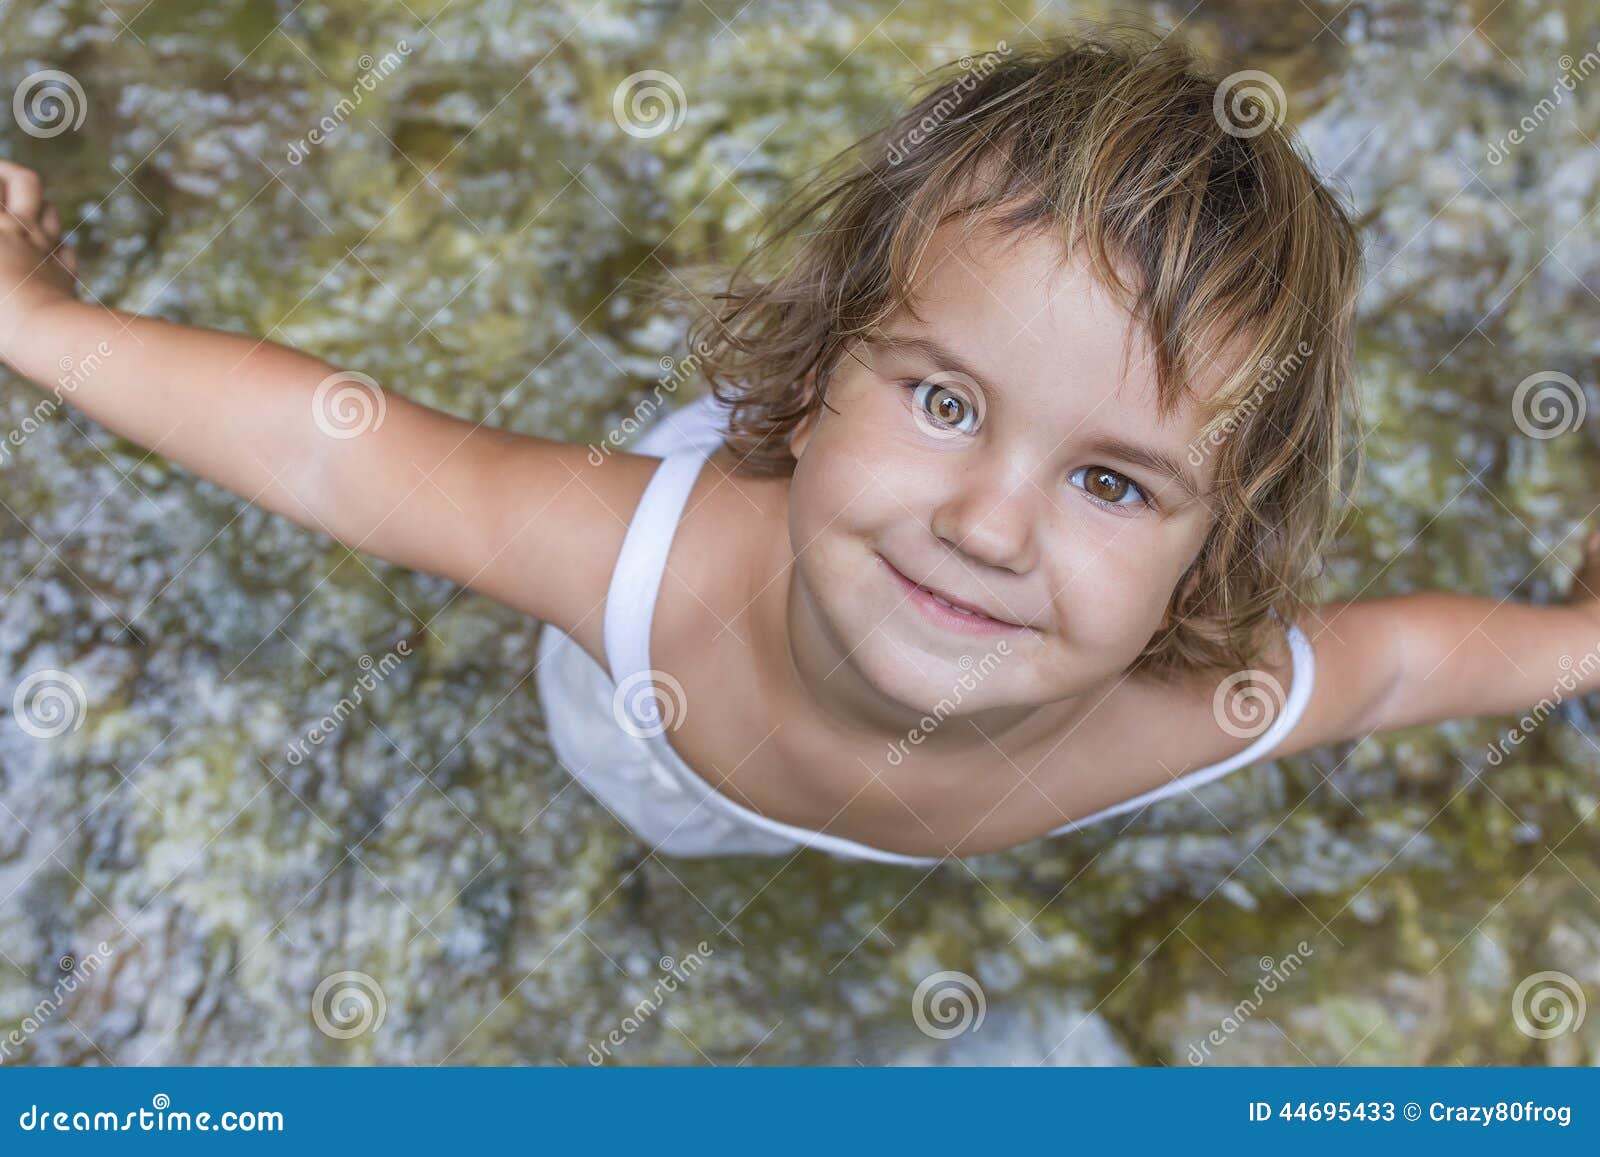 Smiling Toddler Child Girl On Waterfall Background Stock Image - Image ...